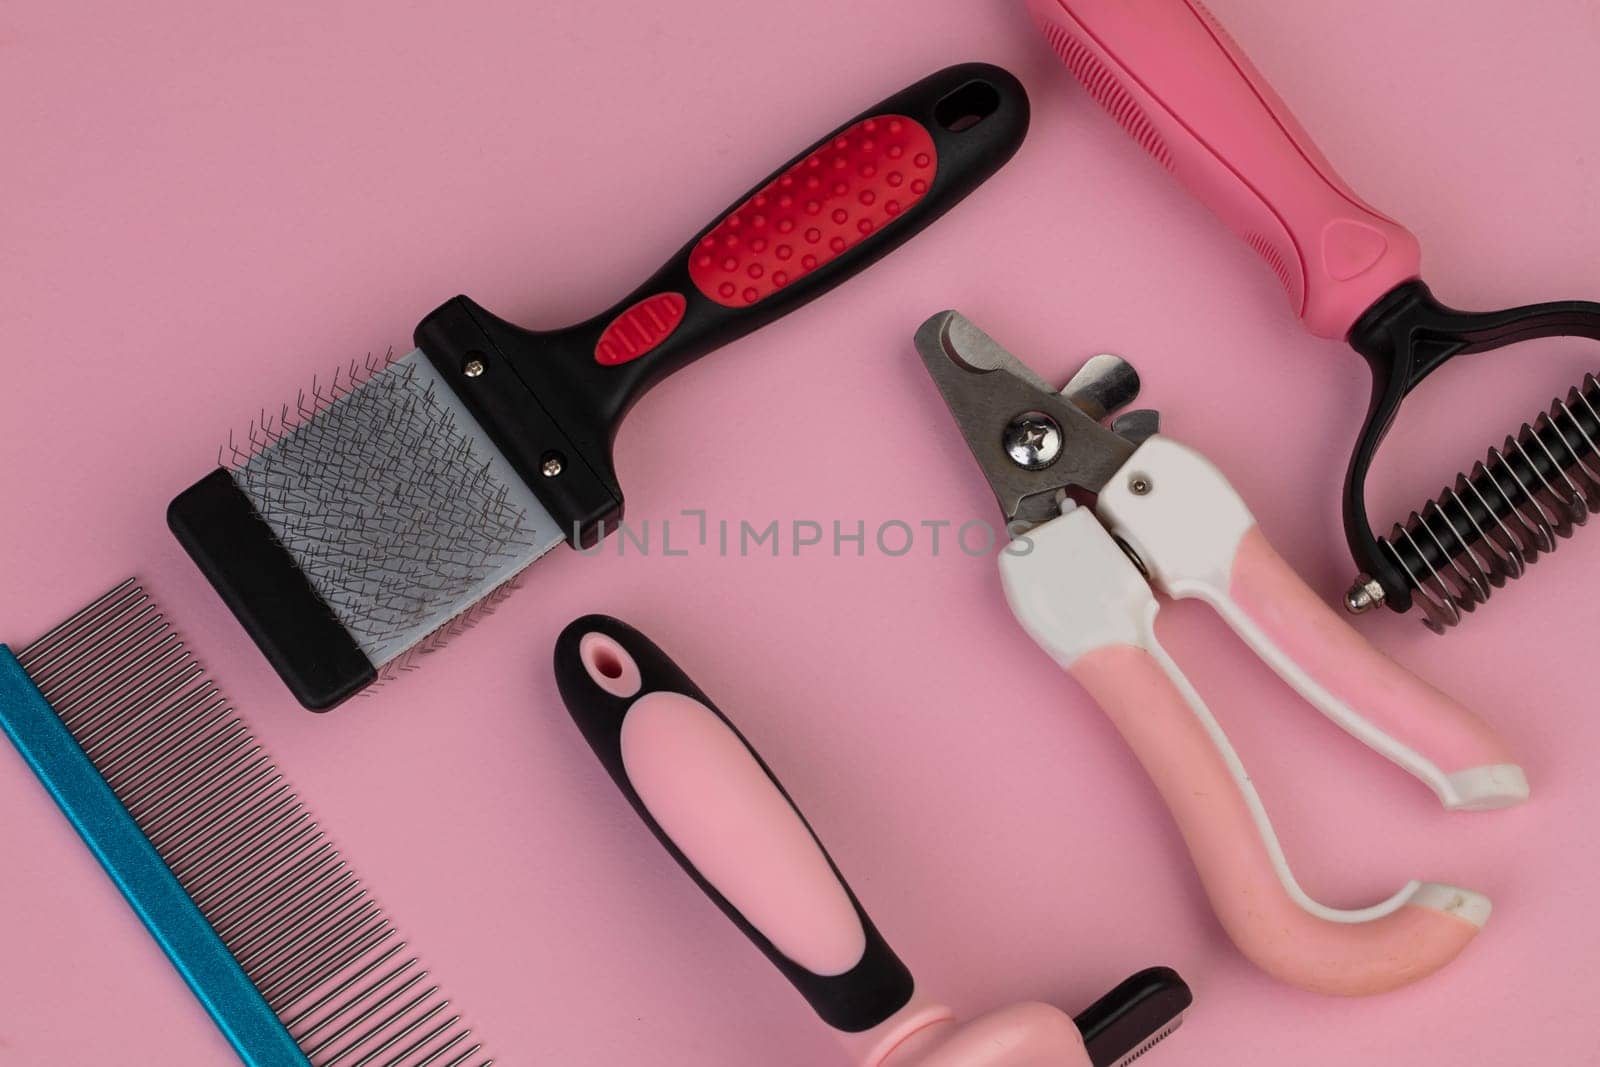 Tool for the groomer on a pink background. Dog grooming accessories. Combs and brushes for animals. View from above